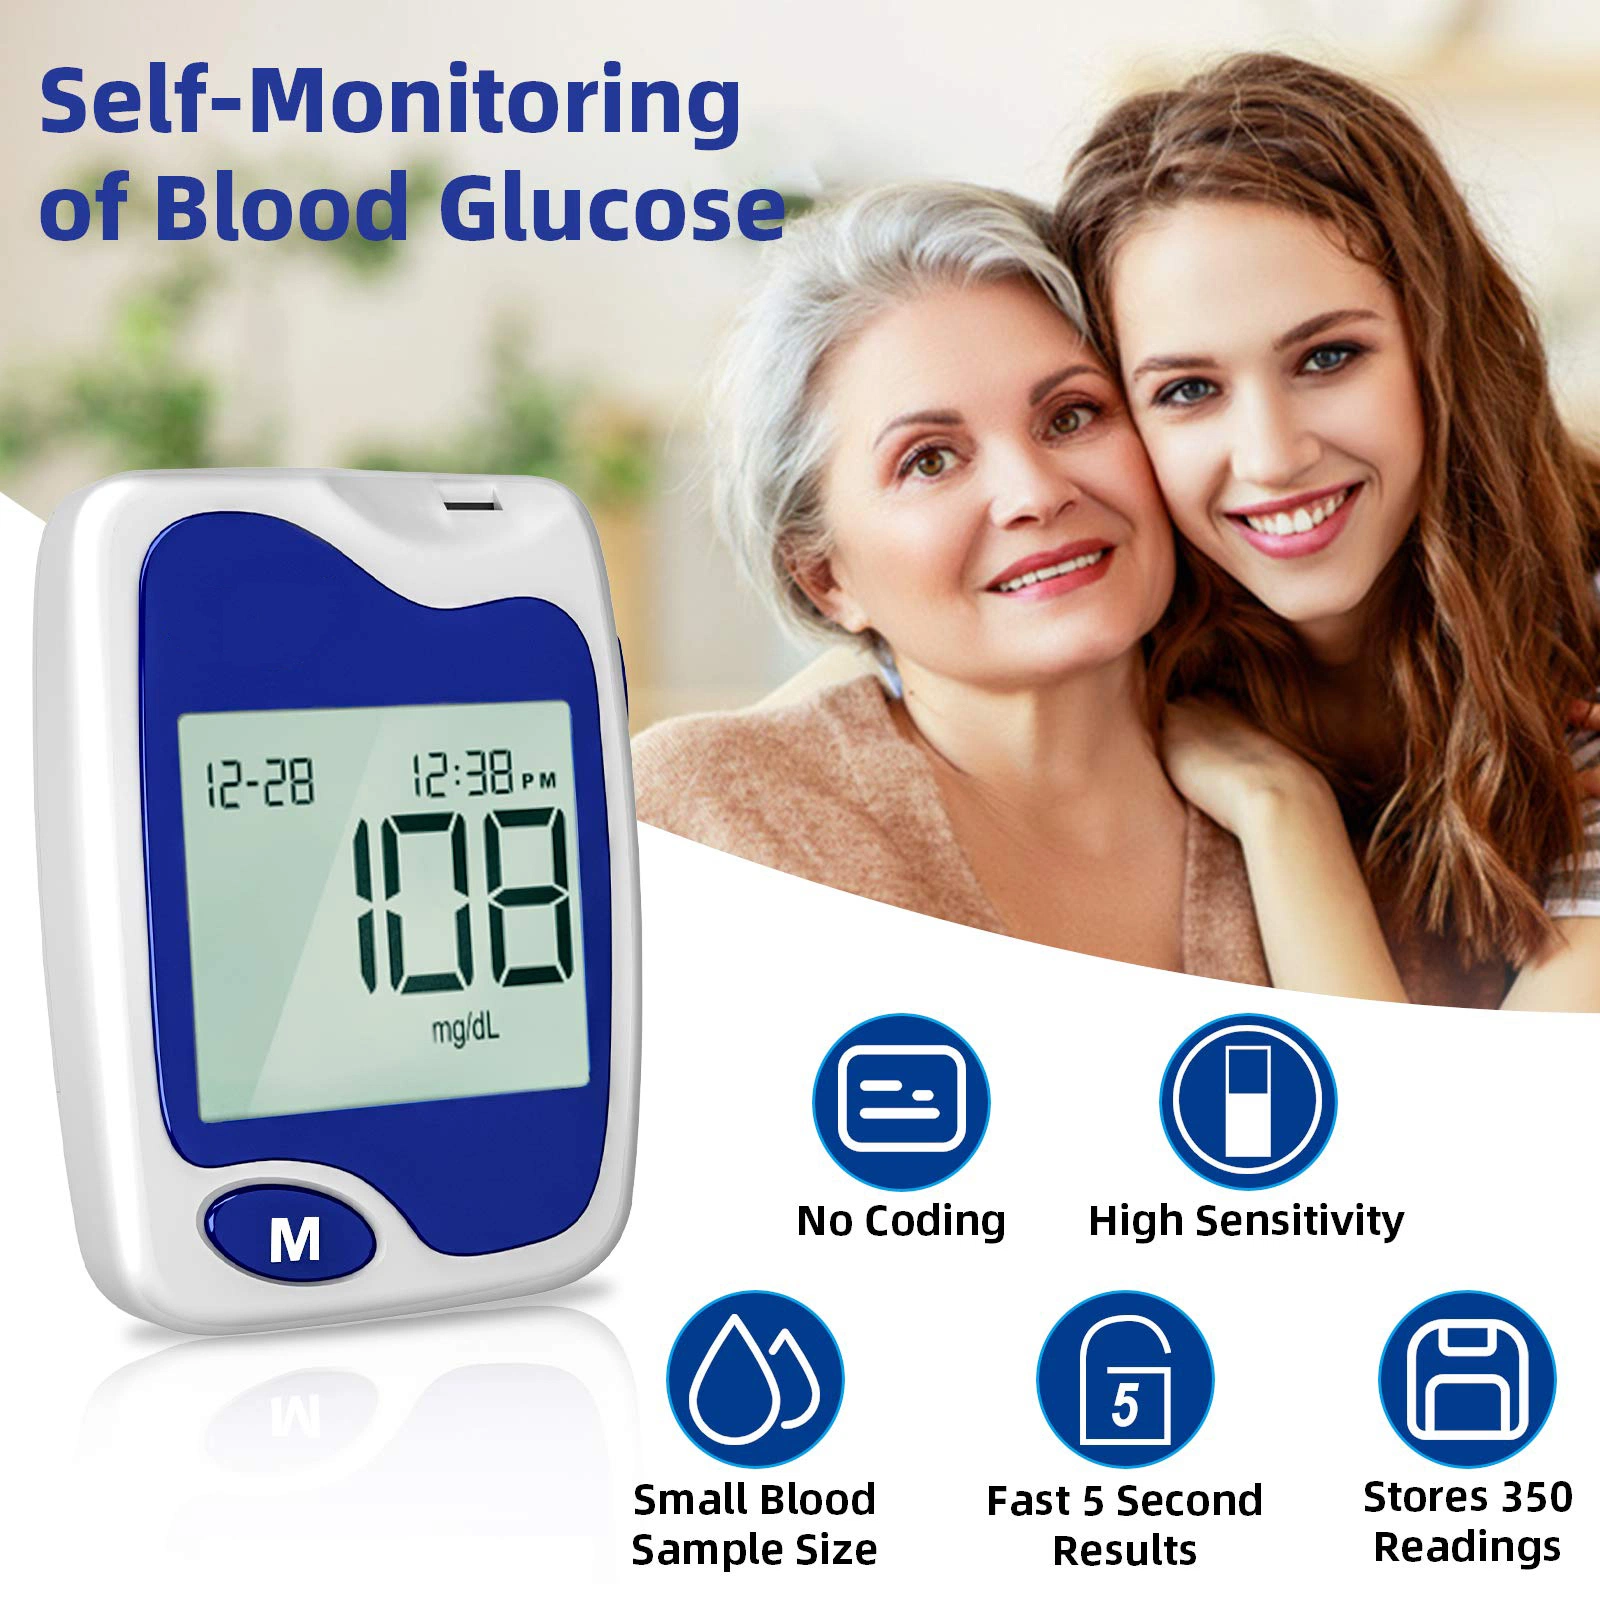 Best Selling Easy Use/Operated Blood Glucose Meter Sugar Quick Check Glucometer with Test Strips